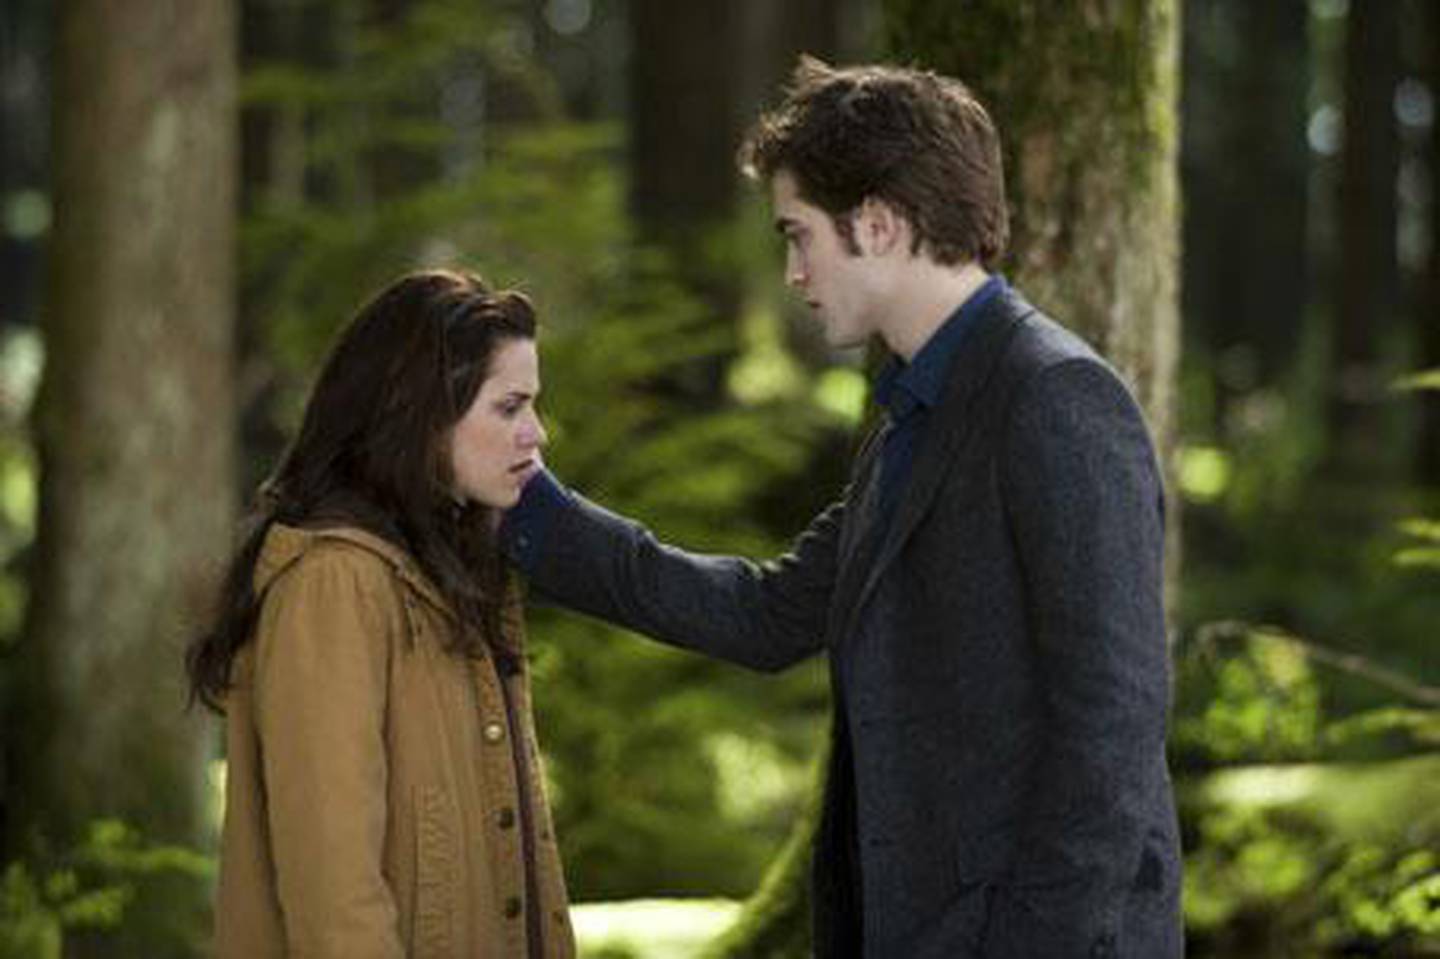 In the successful movie adaptions of the ‘Twilight’ novels, Robert Pattinson plays Edward Cullen and Kristen Stewart plays Bella Swan. 